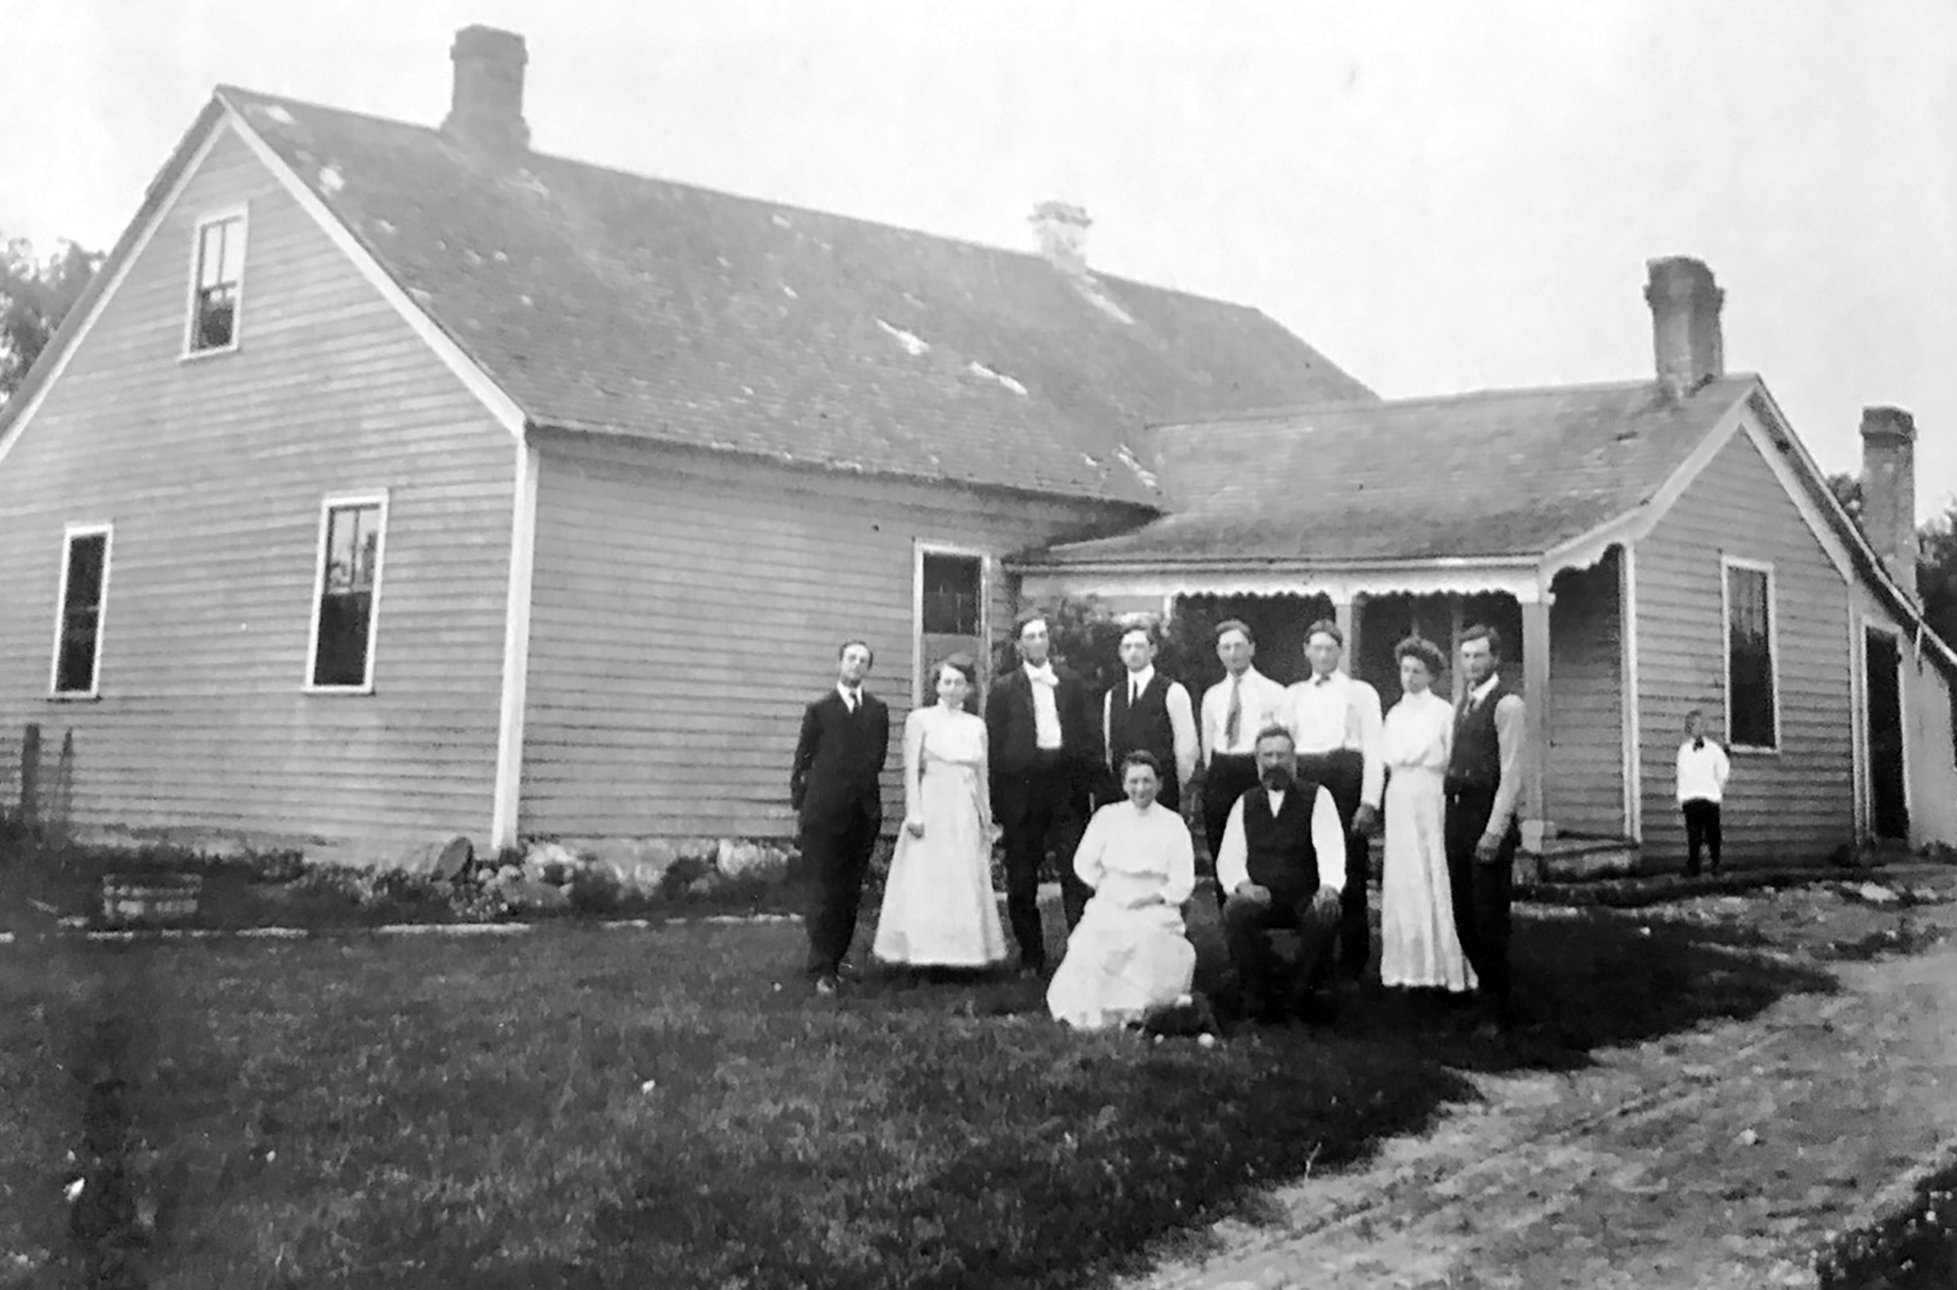 The John Klug family, German immigrants in front of their 1800s home.